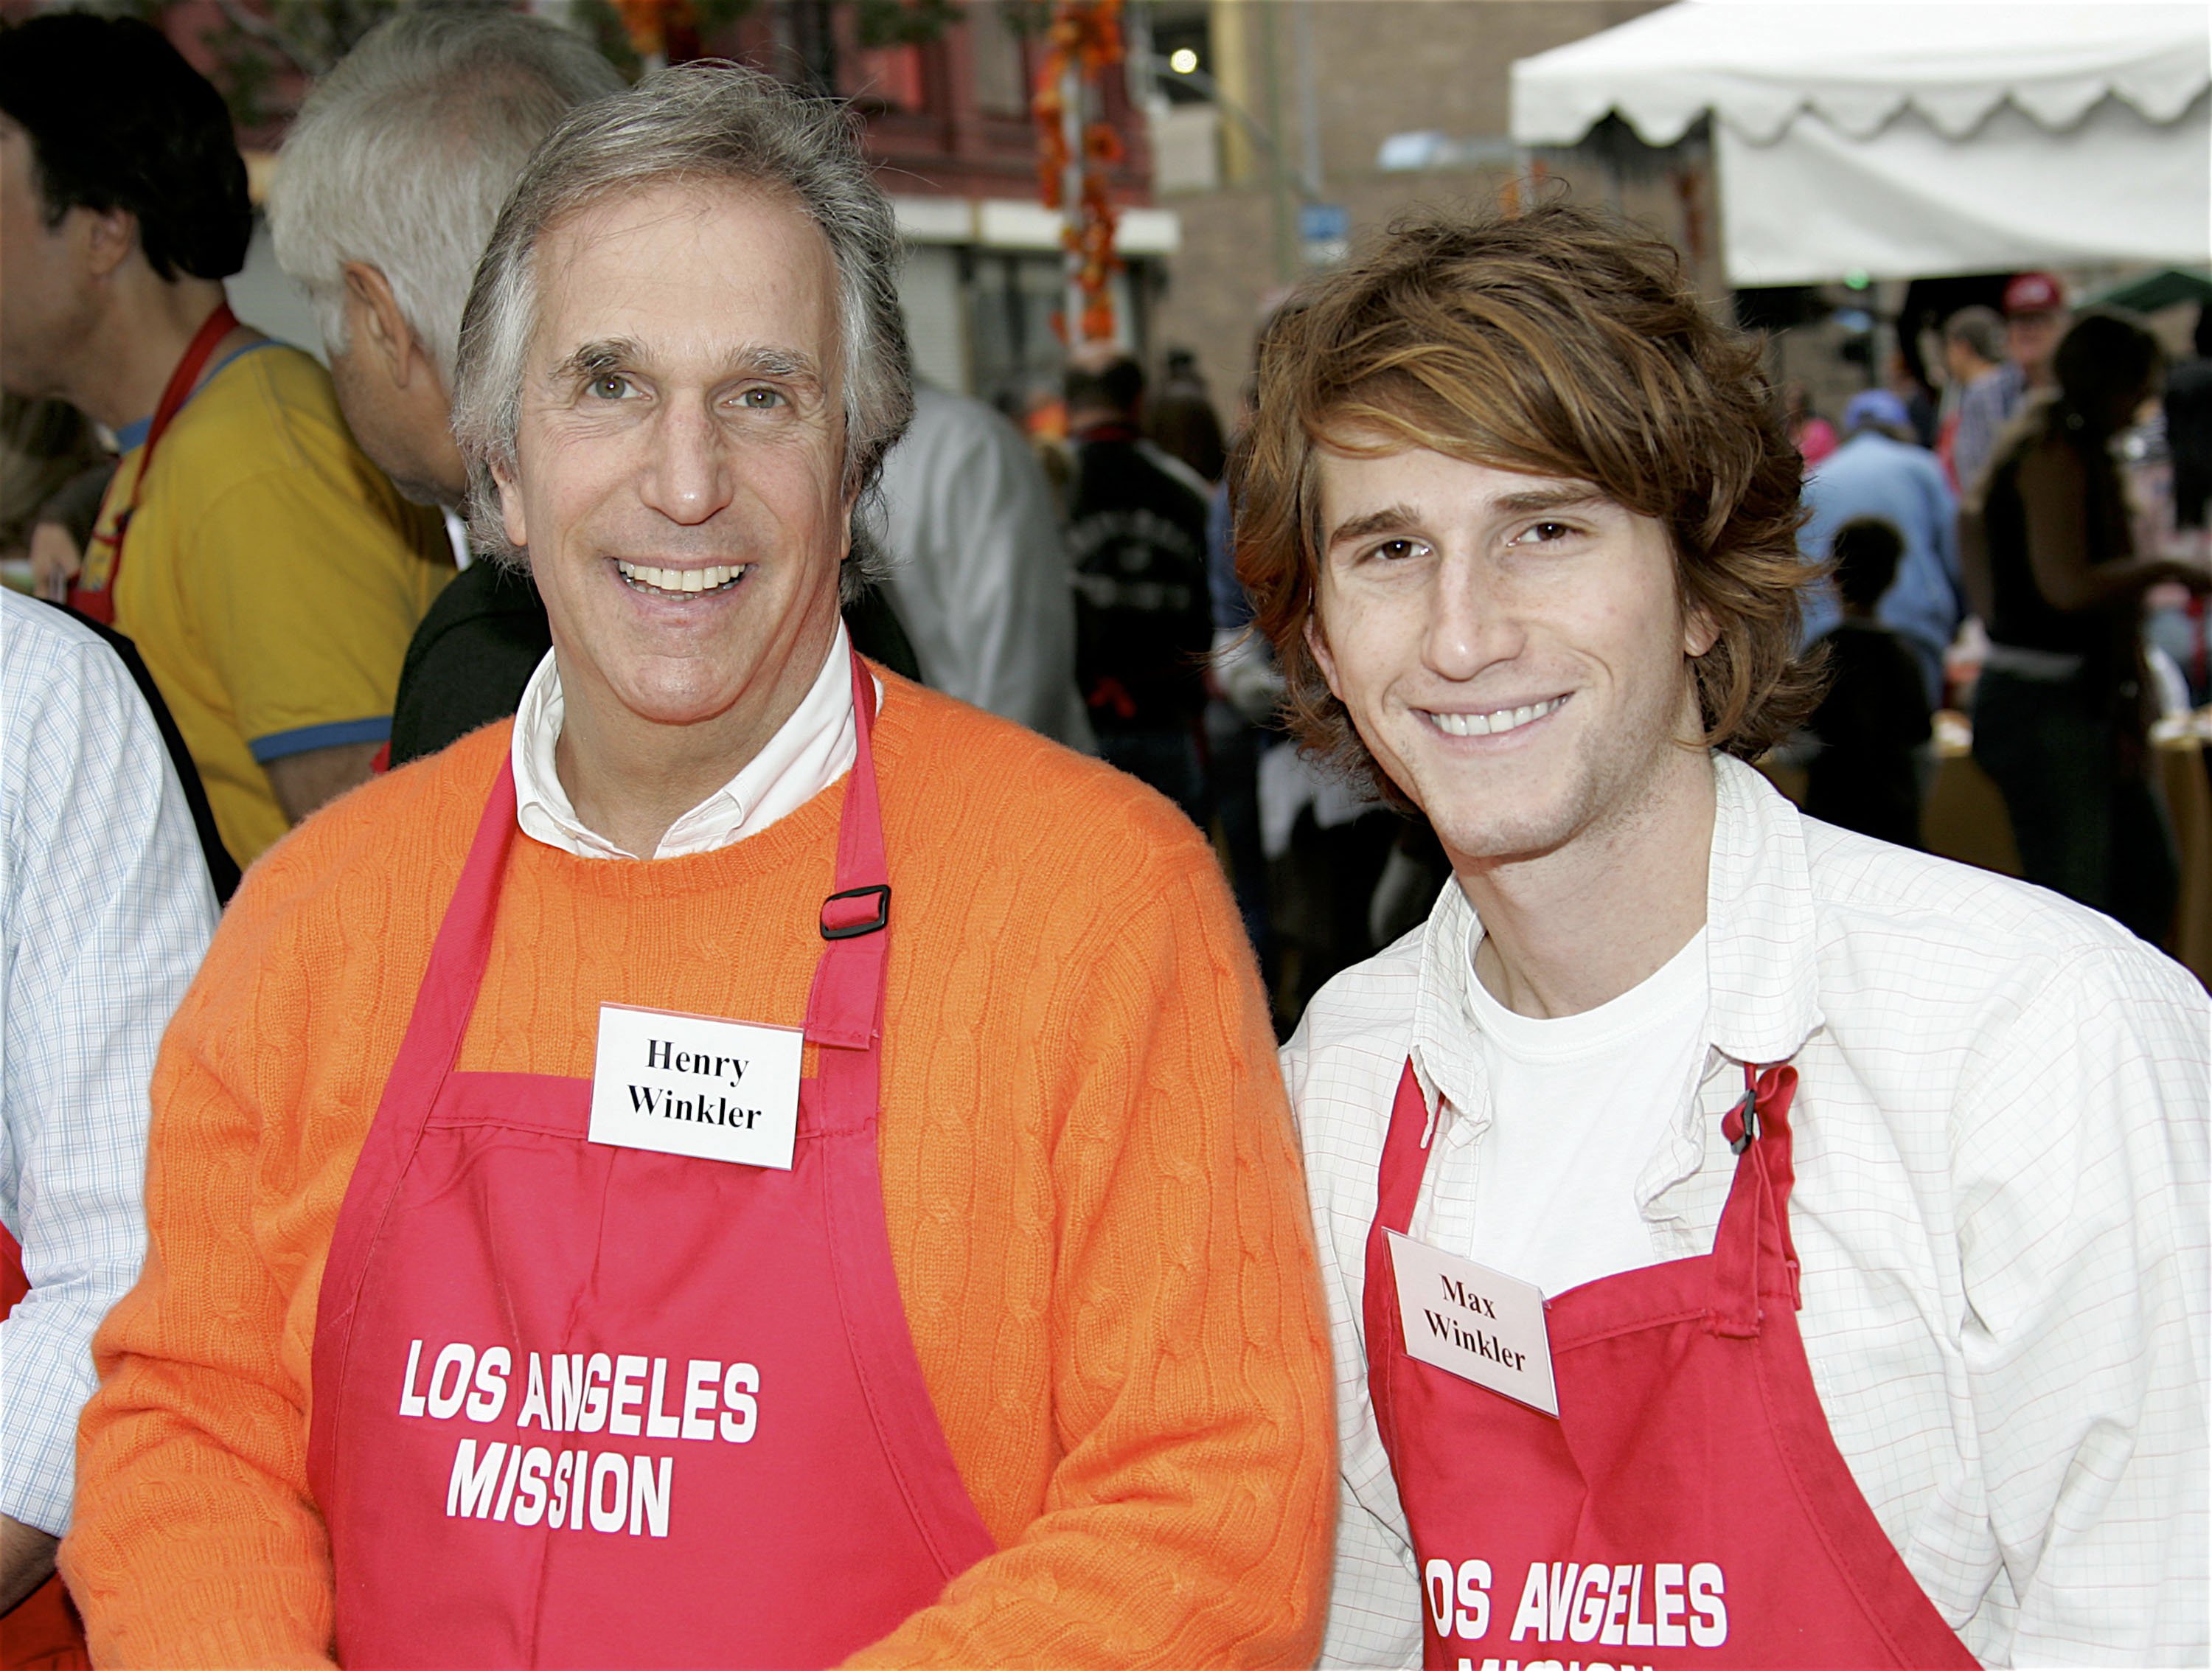 Henry Winkler and his son, Max, pose between serving meals at the Los Angeles Mission and Anne Douglas Center's Thanksgiving Meal for the Homeless on November 23, 2005 in Los Angeles, California | Photo: Getty Images